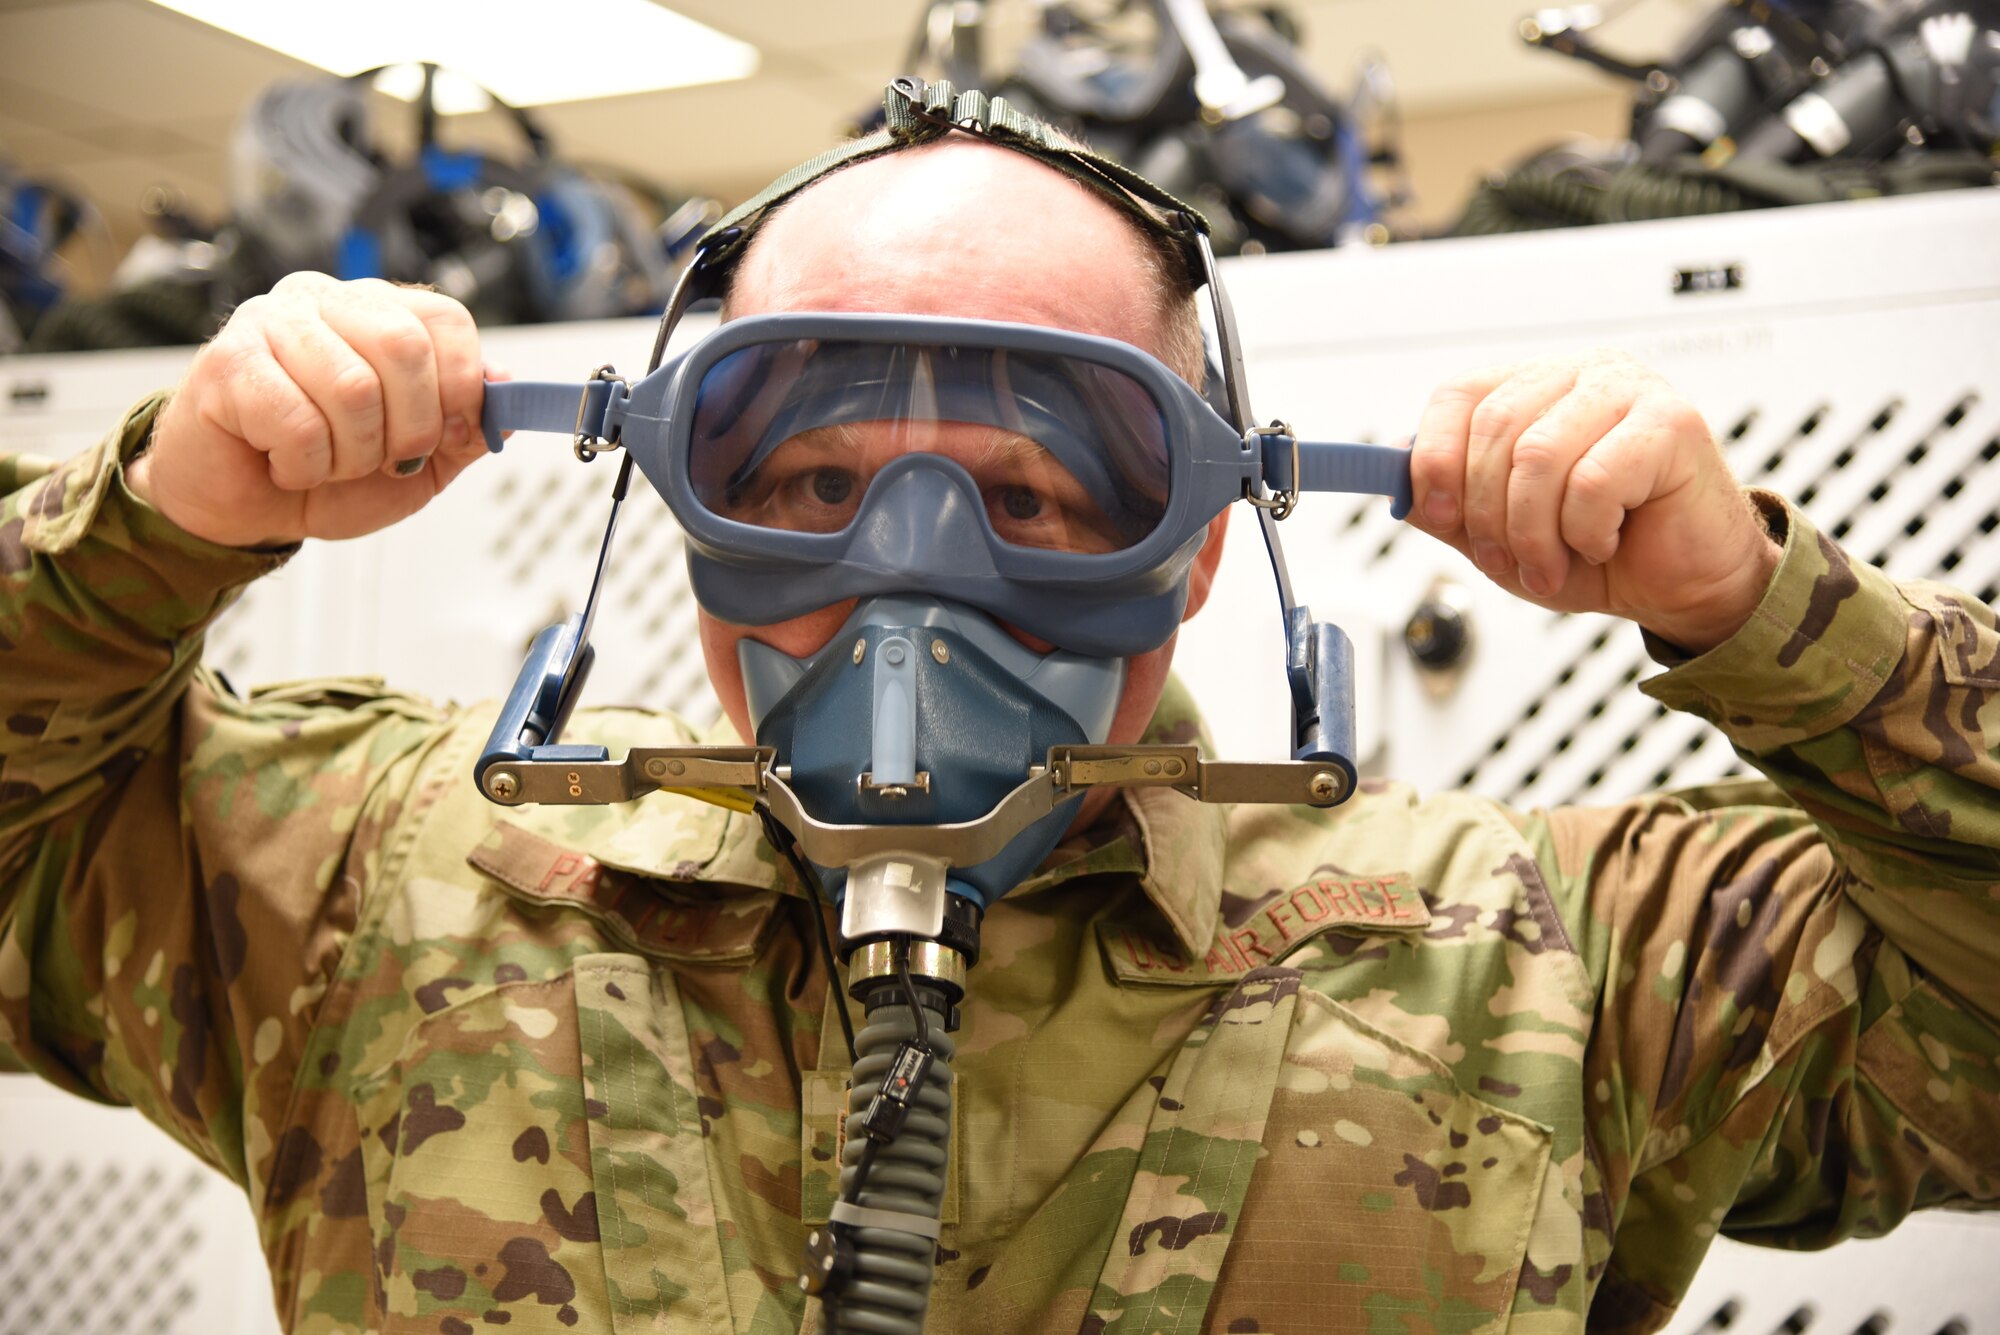 Tech. Sgt. Ronald Patton, 403rd Operation Support Squadron aircrew flight equipment craftsman, demonstrates how to put on the old anti-smoke goggles that has been used for more than 20 years at Keesler Air Force Base, Mississippi. The new ASGs are an easier quick don system, that now has the eye piece and nose/mouth cover as one single piece, similar to those used by firefighters, and will be in place on the aircraft by the middle of August 2019. (U.S. Air Force photo by Jessica L. Kendziorek)